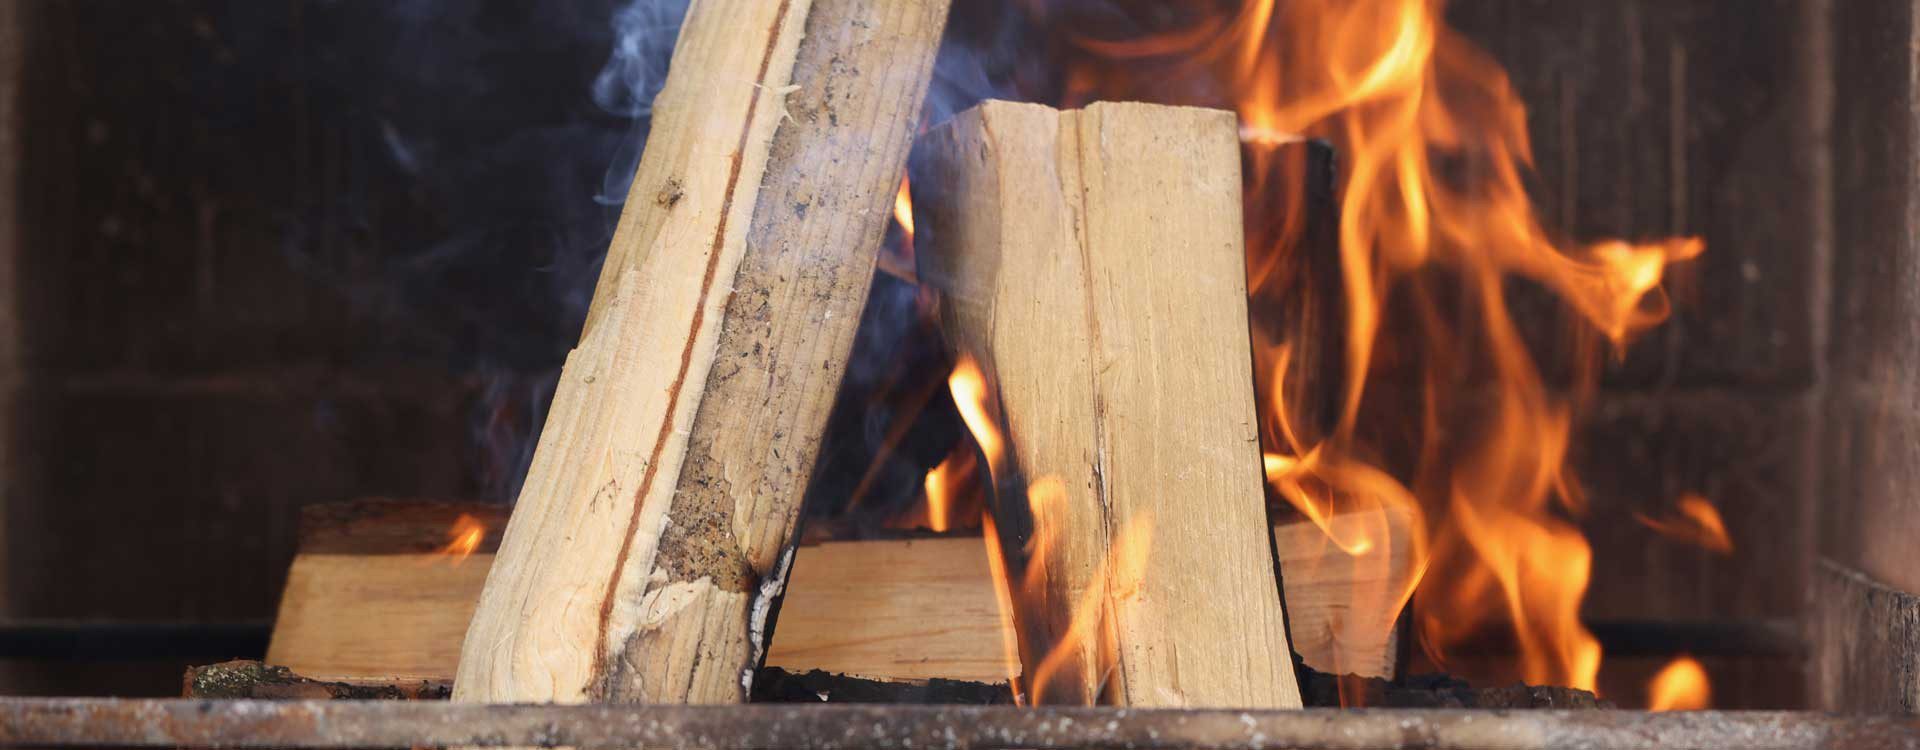 A GUIDE TO KILN-DRIED FIREWOOD TO BURN IN A FIREPLACE